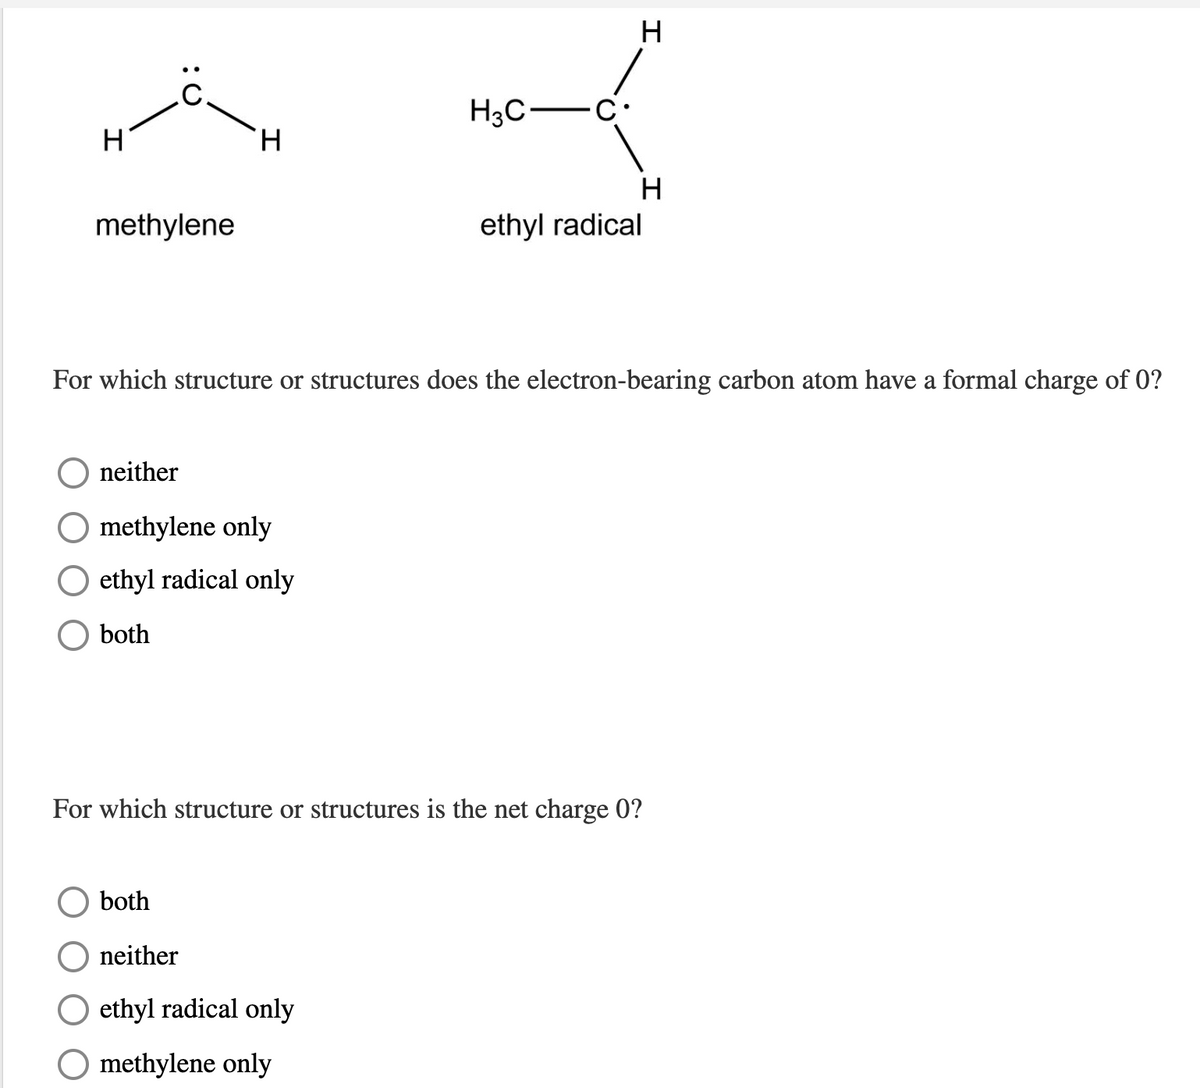 H
H3C-C
H
H.
H
methylene
ethyl radical
For which structure or structures does the electron-bearing carbon atom have a formal charge of 0?
neither
O methylene only
ethyl radical only
both
For which structure or structures is the net charge 0?
both
neither
ethyl radical only
O methylene only
エ
